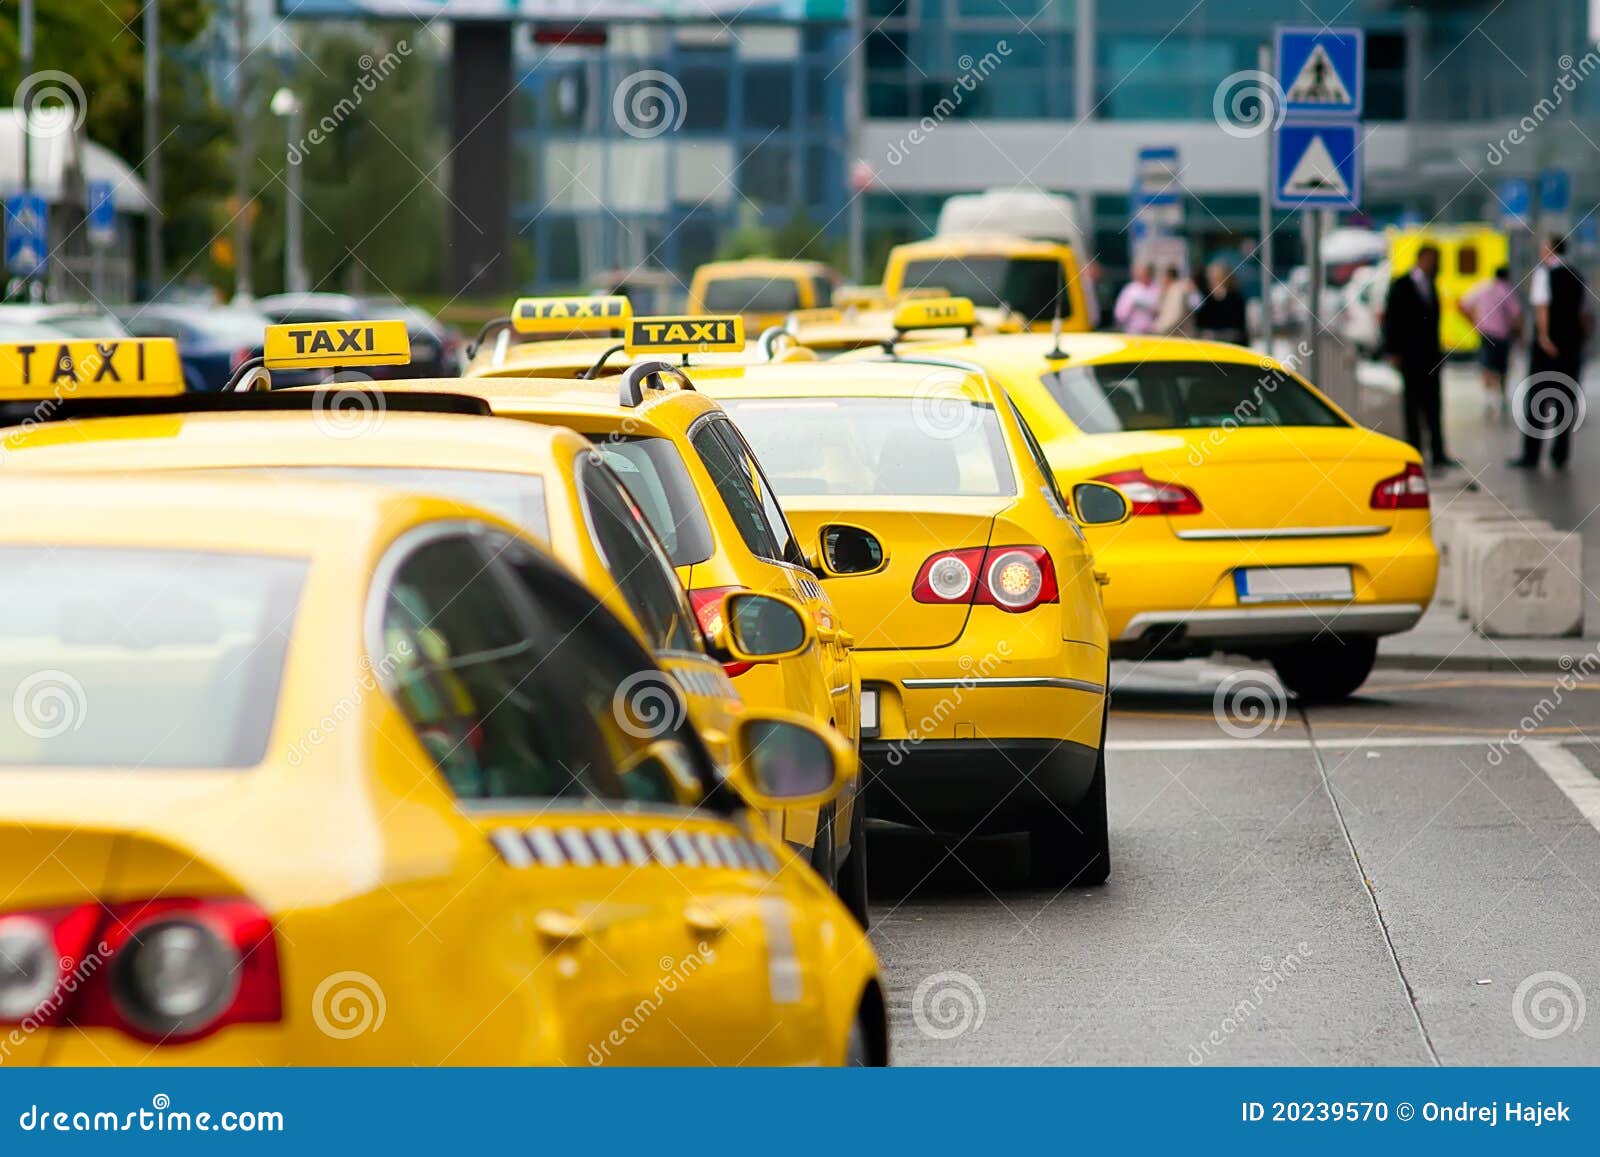 yellow taxi cabs